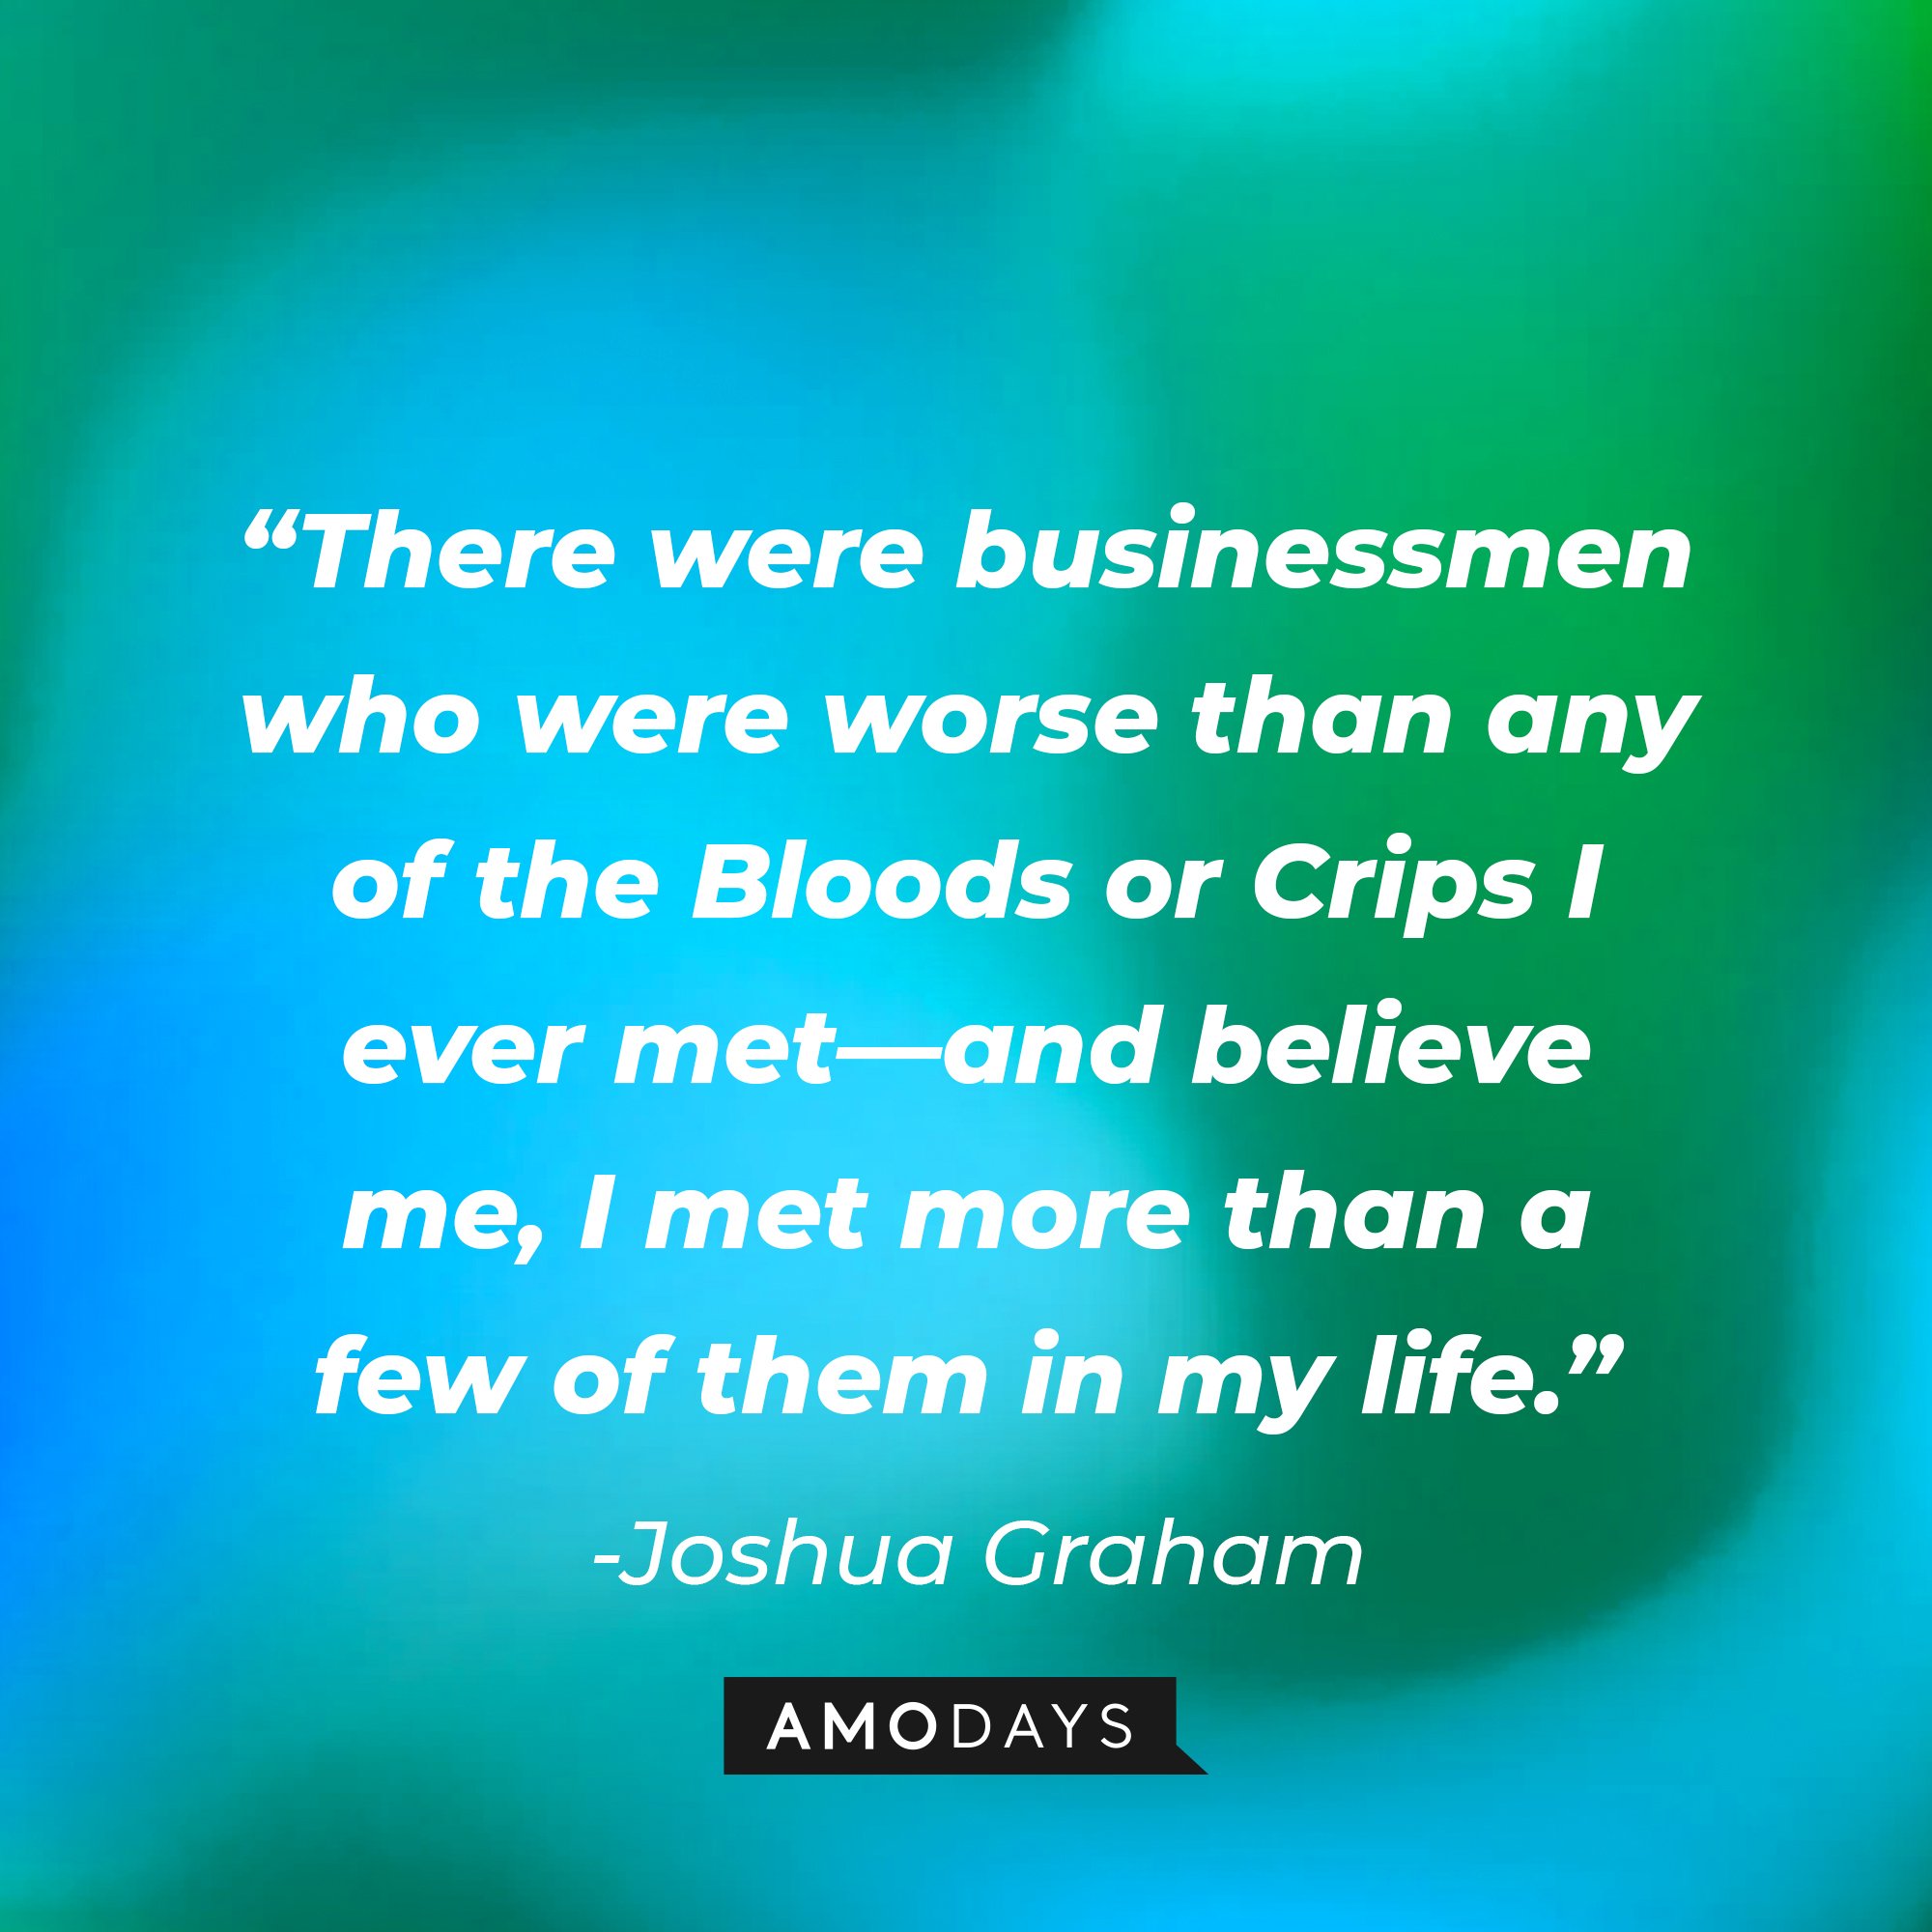 Joshua Graham's quote: “There were businessmen who were worse than any of the Bloods or Crips I ever met—and believe me, I met more than a few of them in my life.”  | Source: Amodays